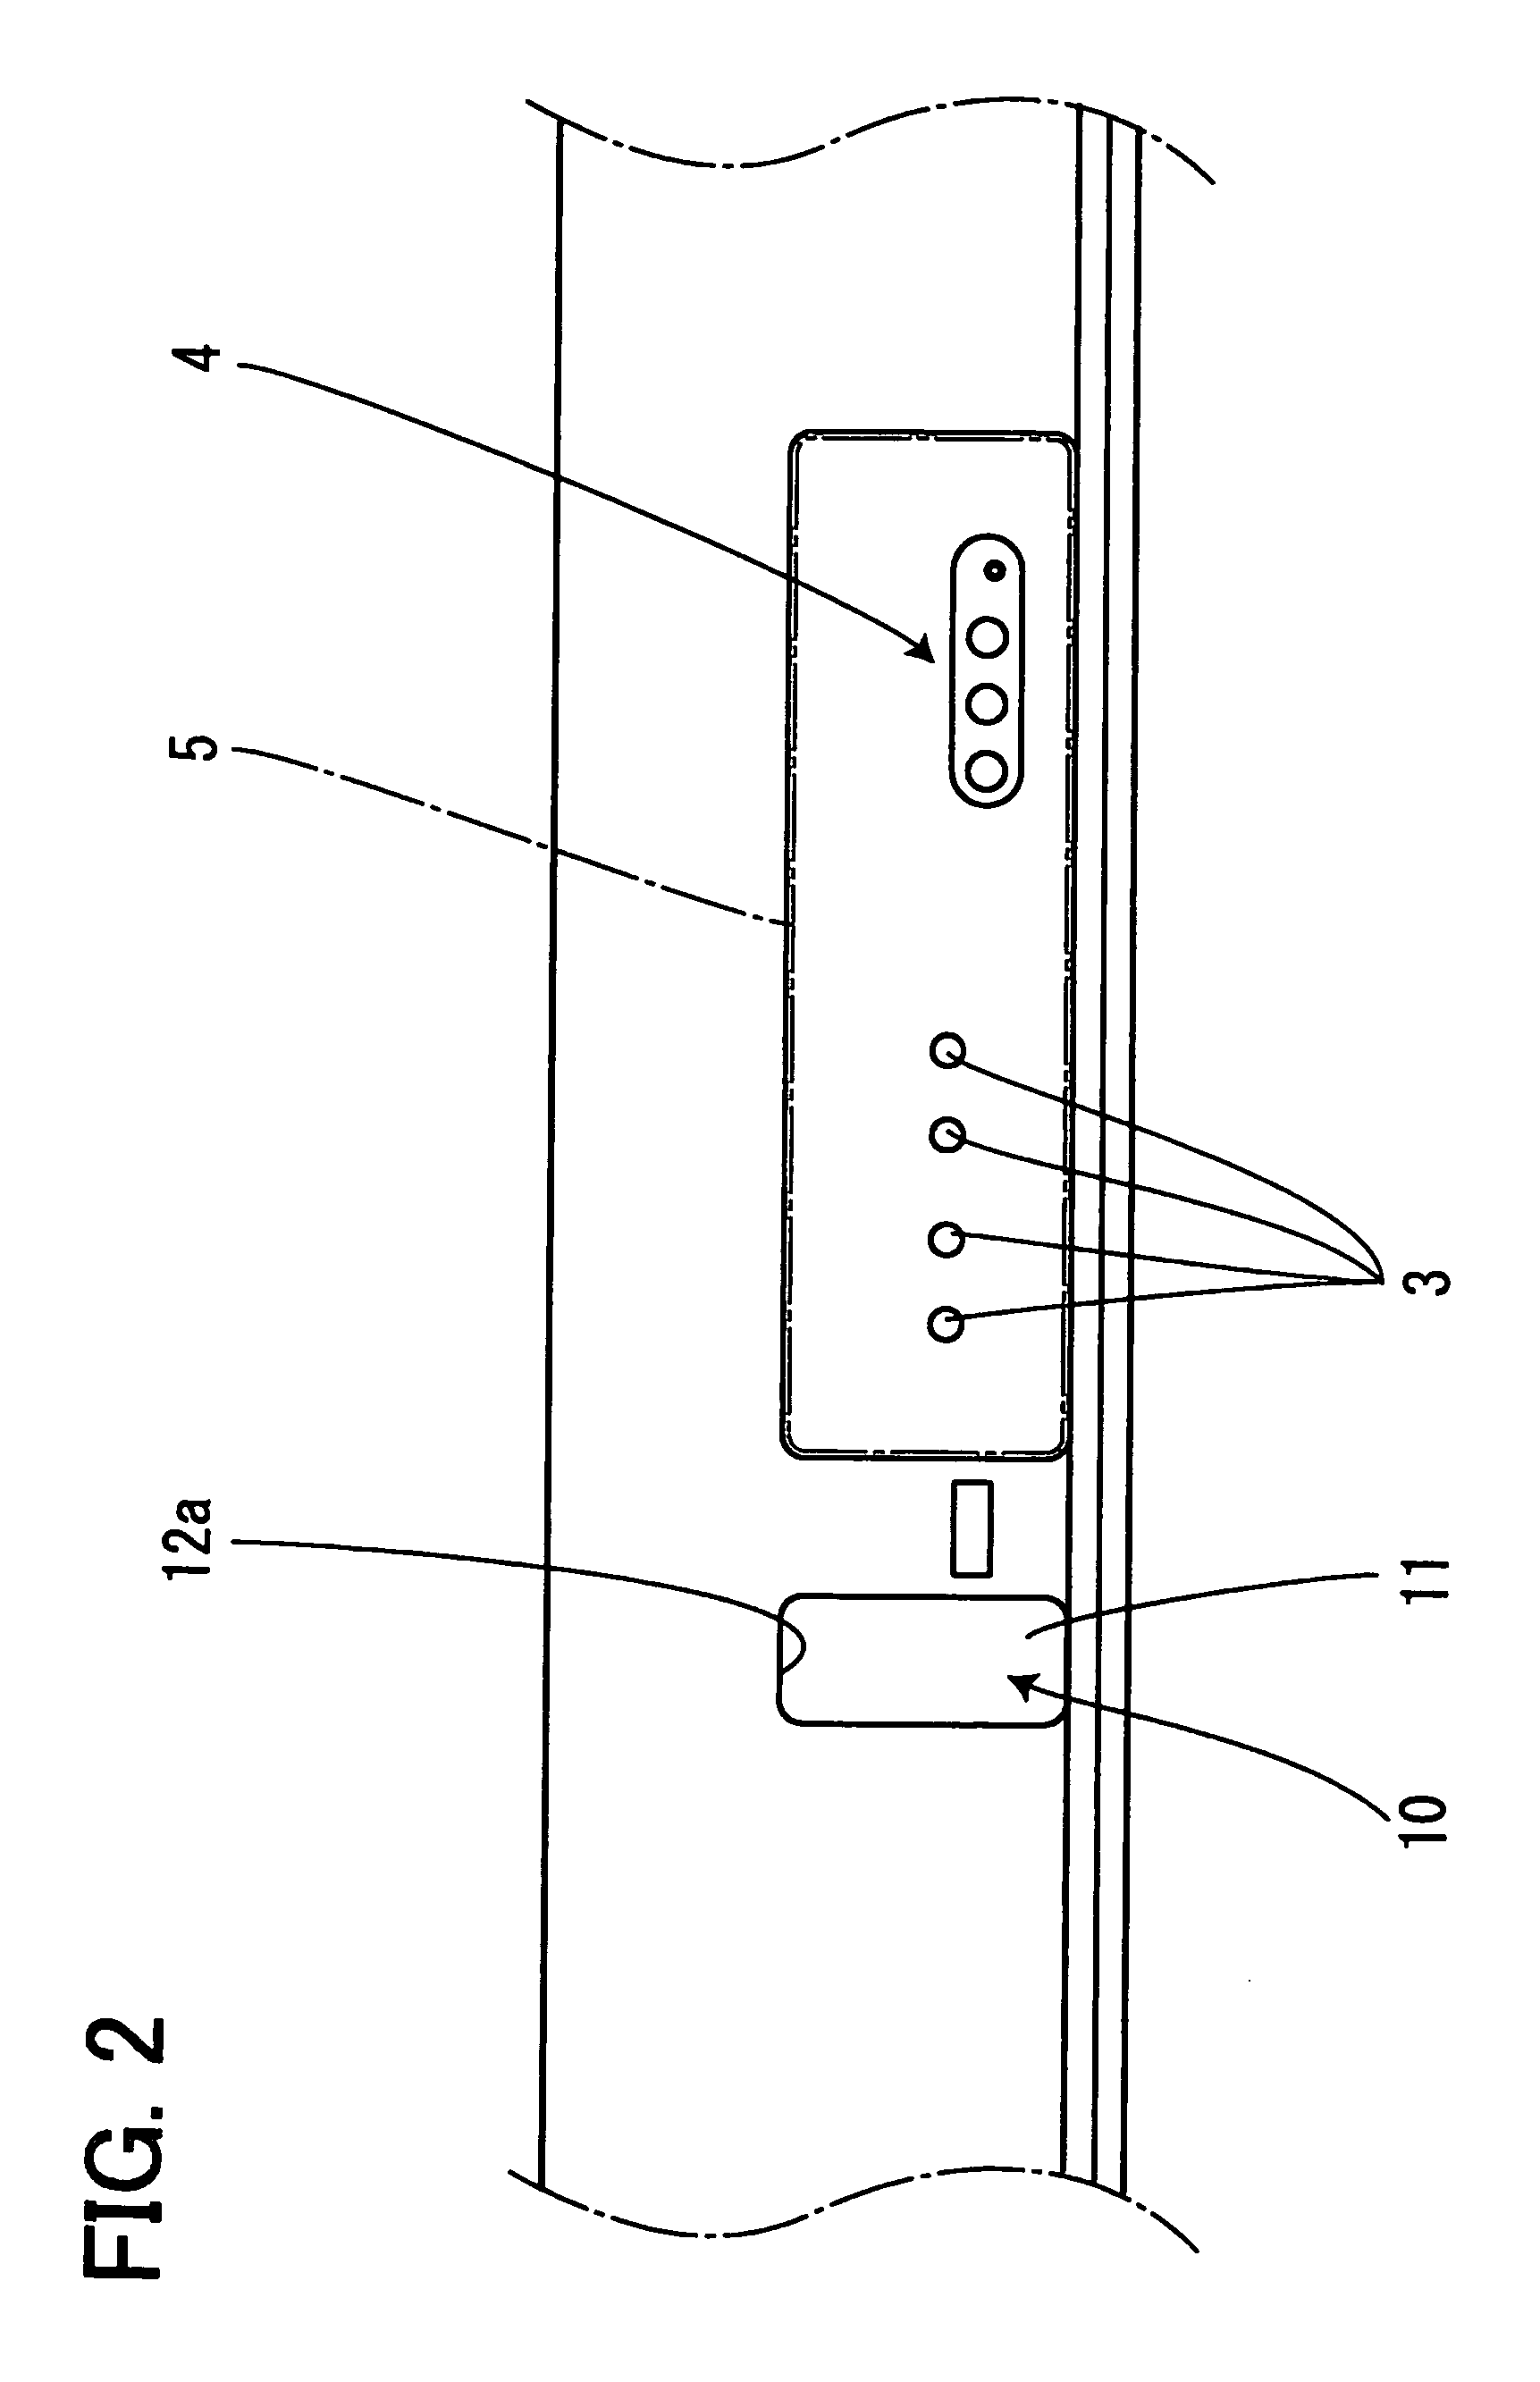 Electronic device with manual operation button